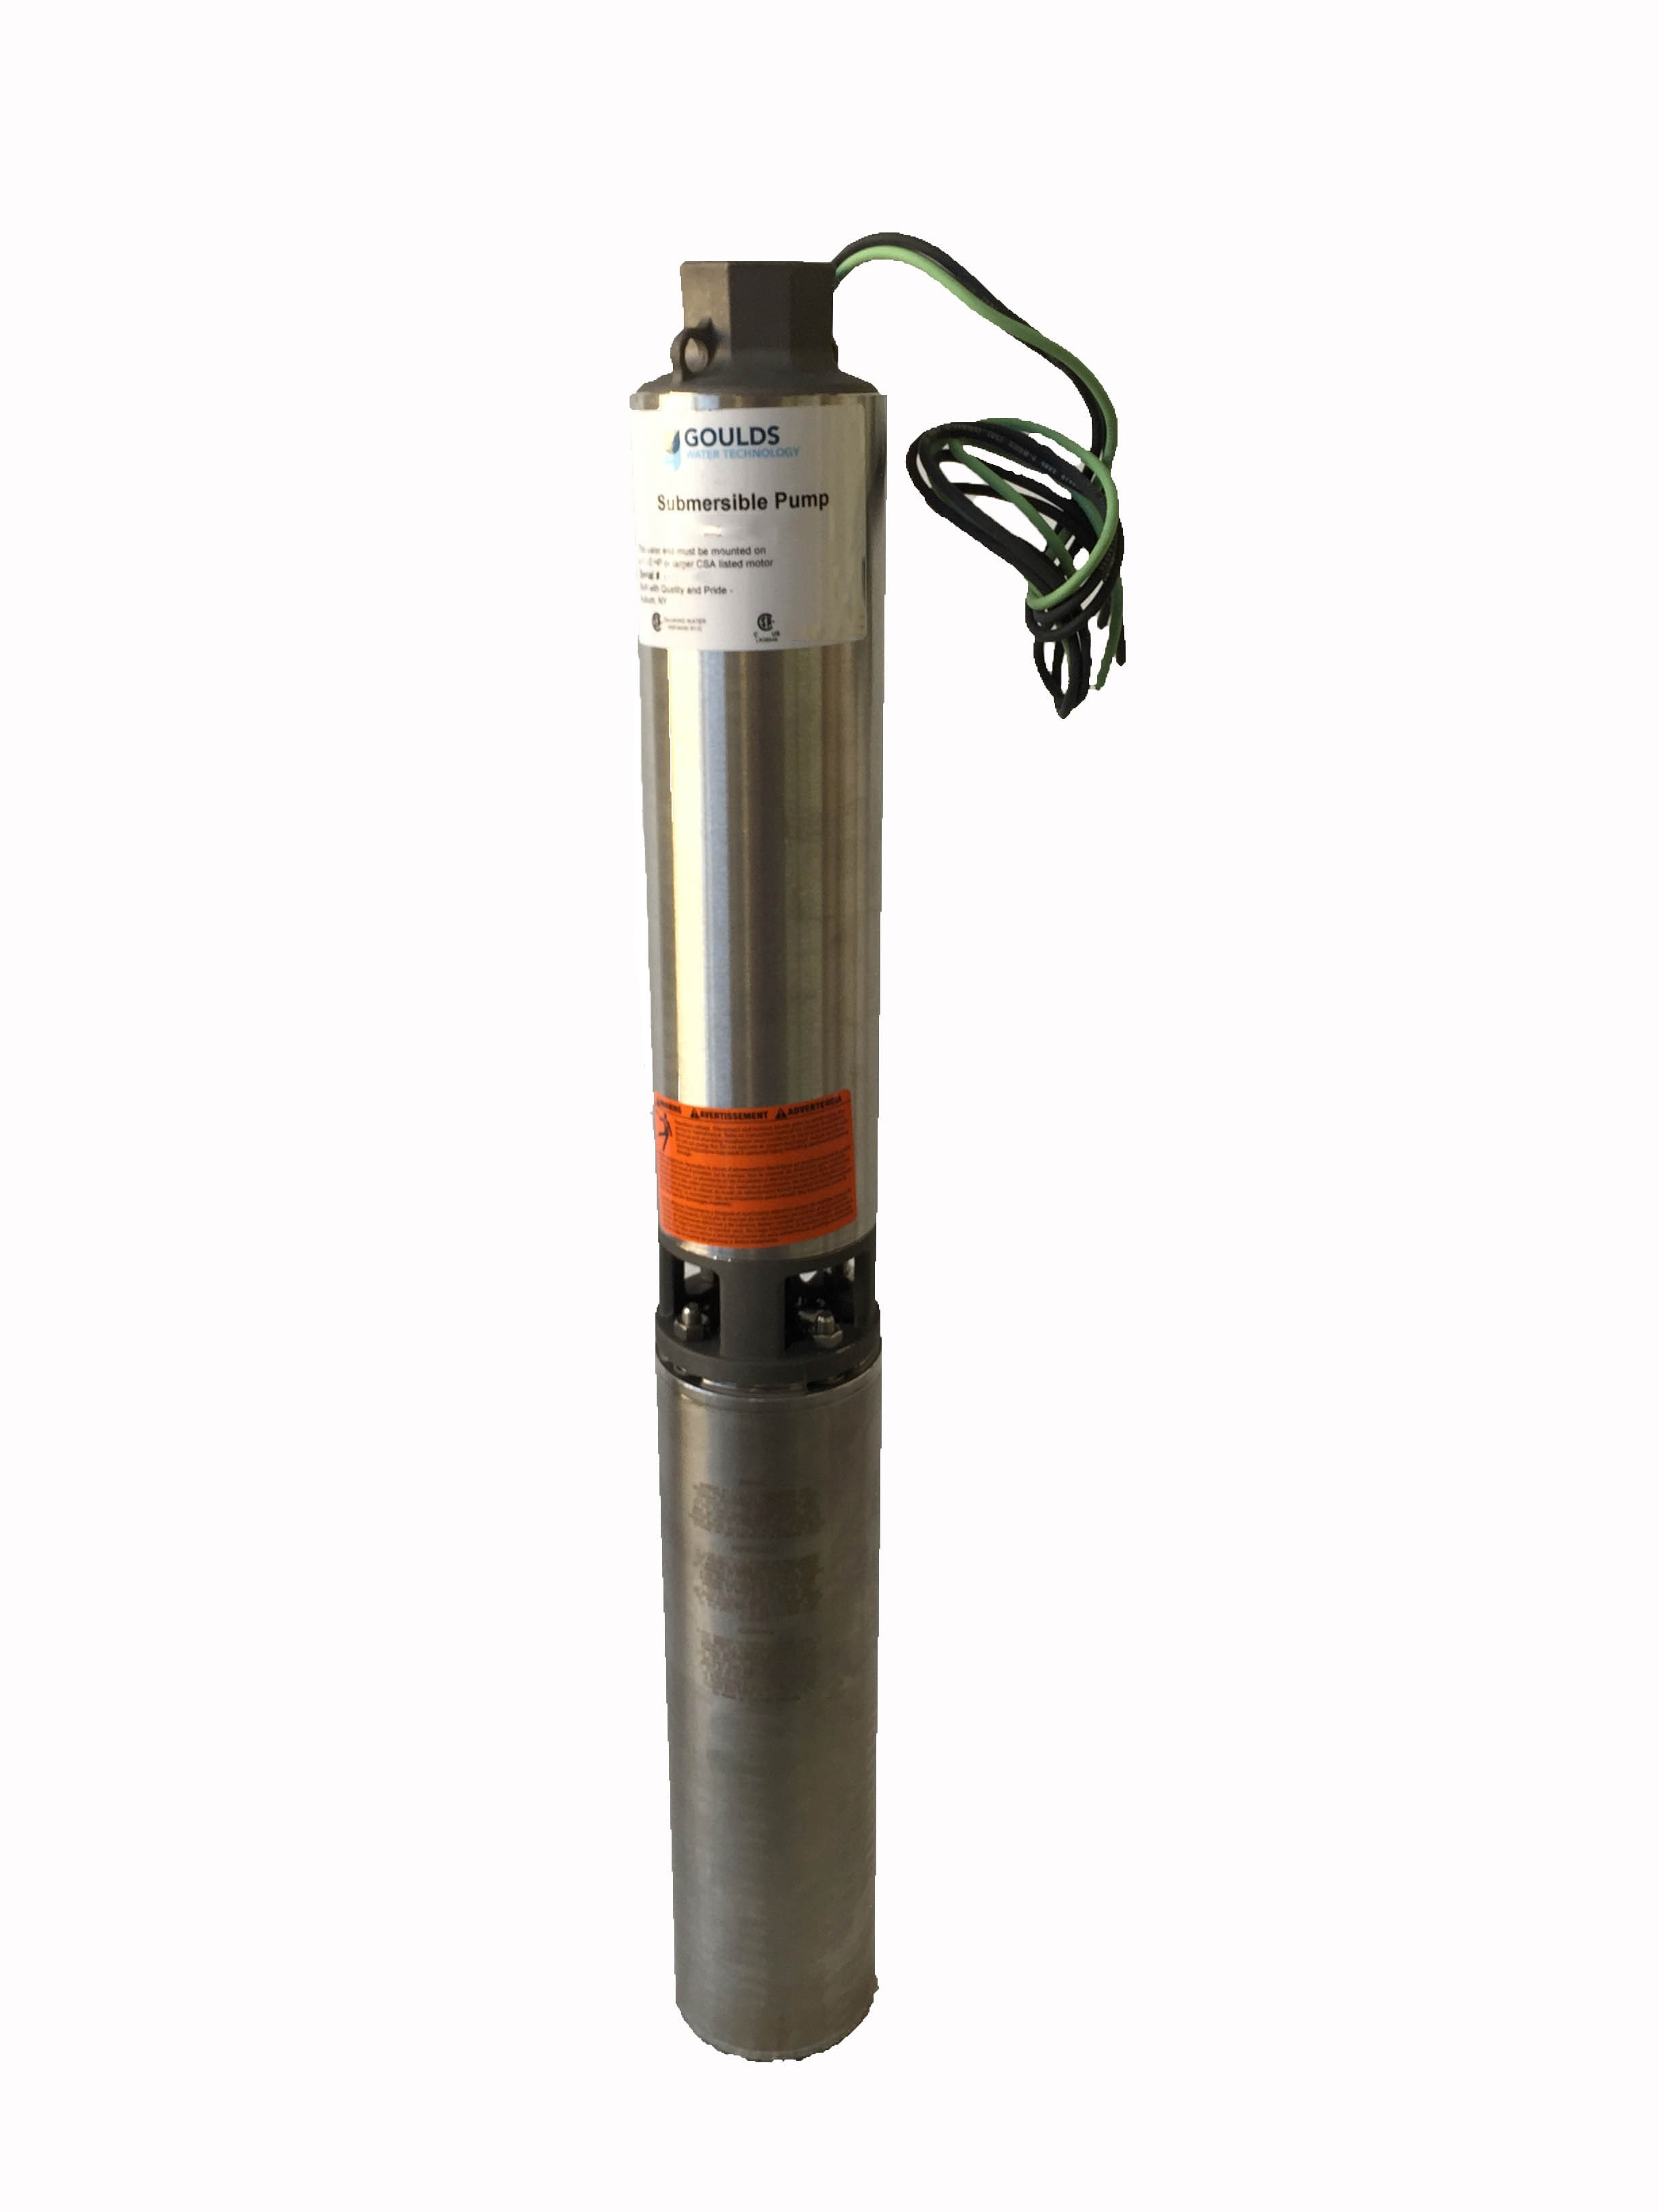 Goulds 5GS15422C 5GPM 1.5HP 230V 2 Wire submersible well pump